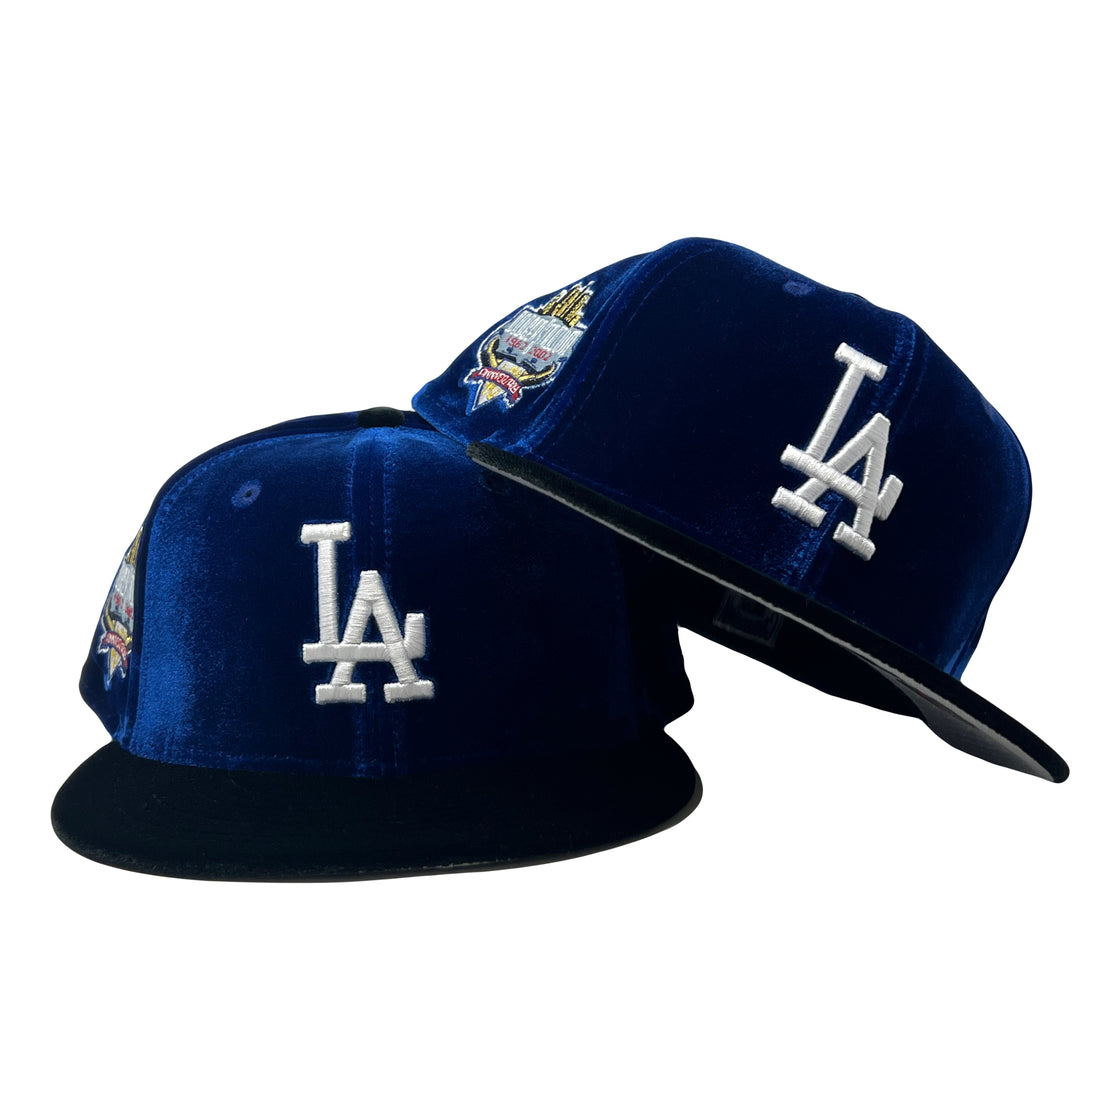 Los Angeles Dodgers 40th Anniversary Velvet Collection New Era Fitted Hat